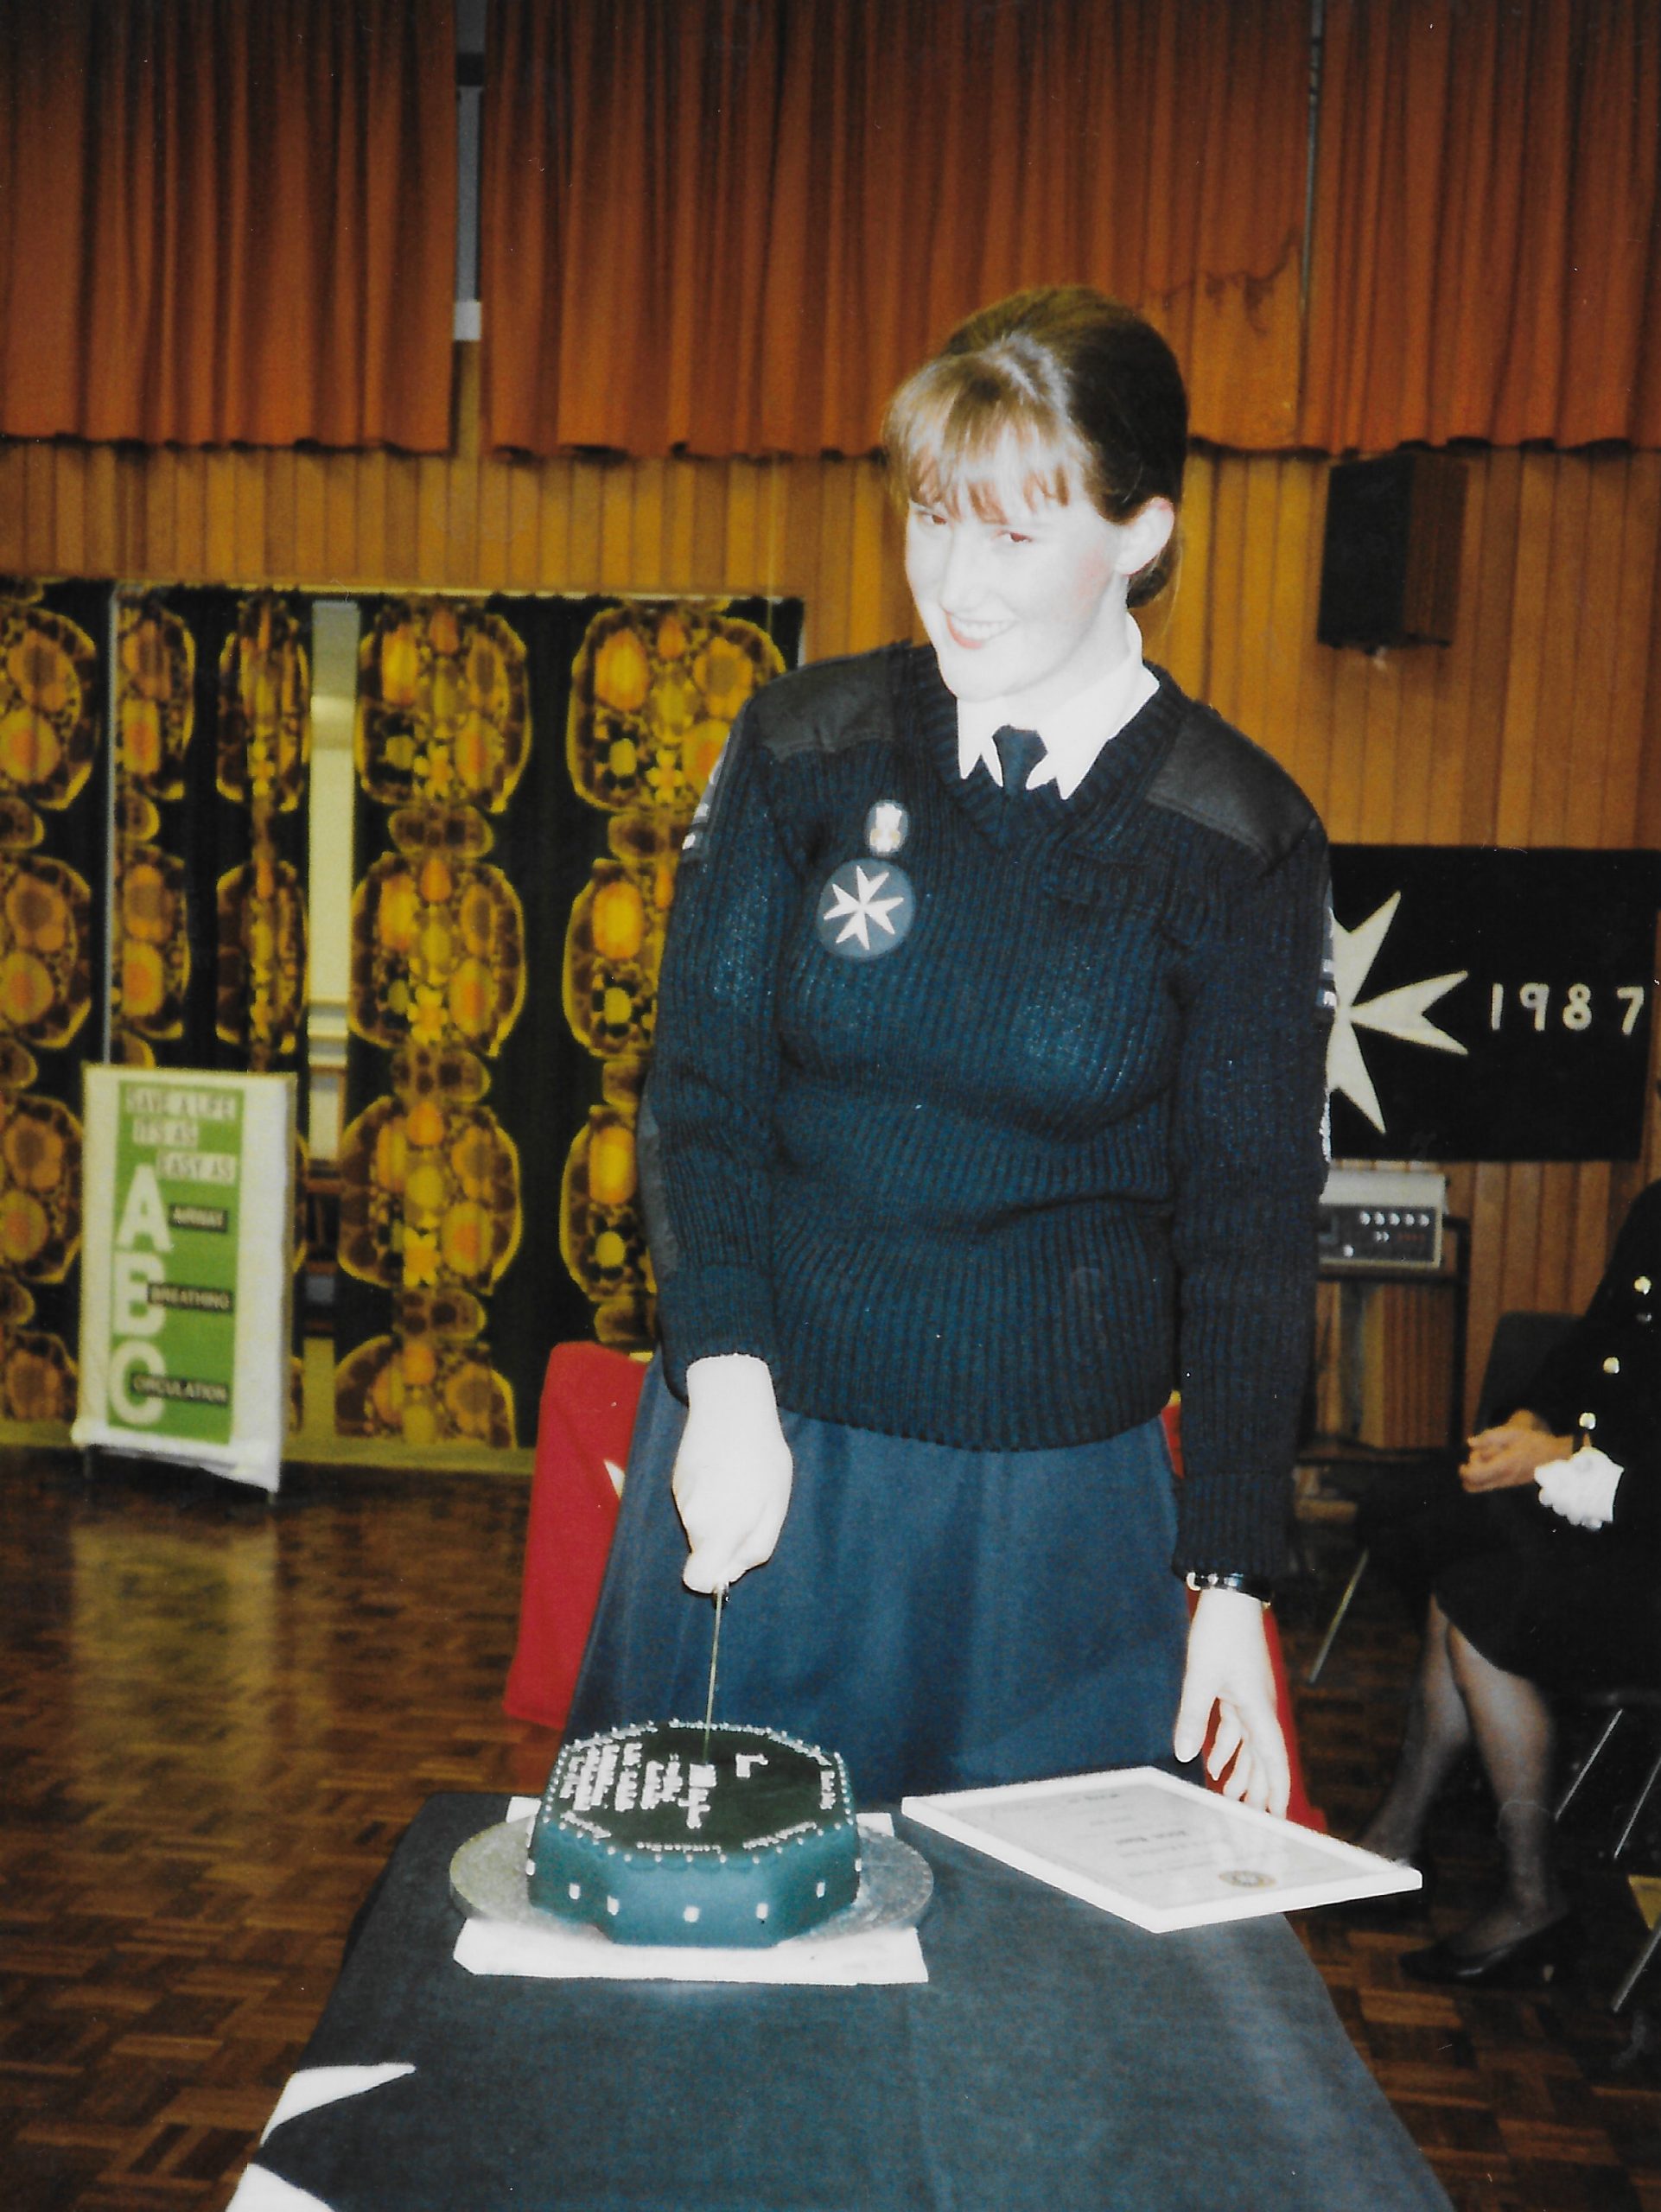 Colour photograph of a female Cadet in black and white uniform cutting into a cake, with her hand resting on her certificate